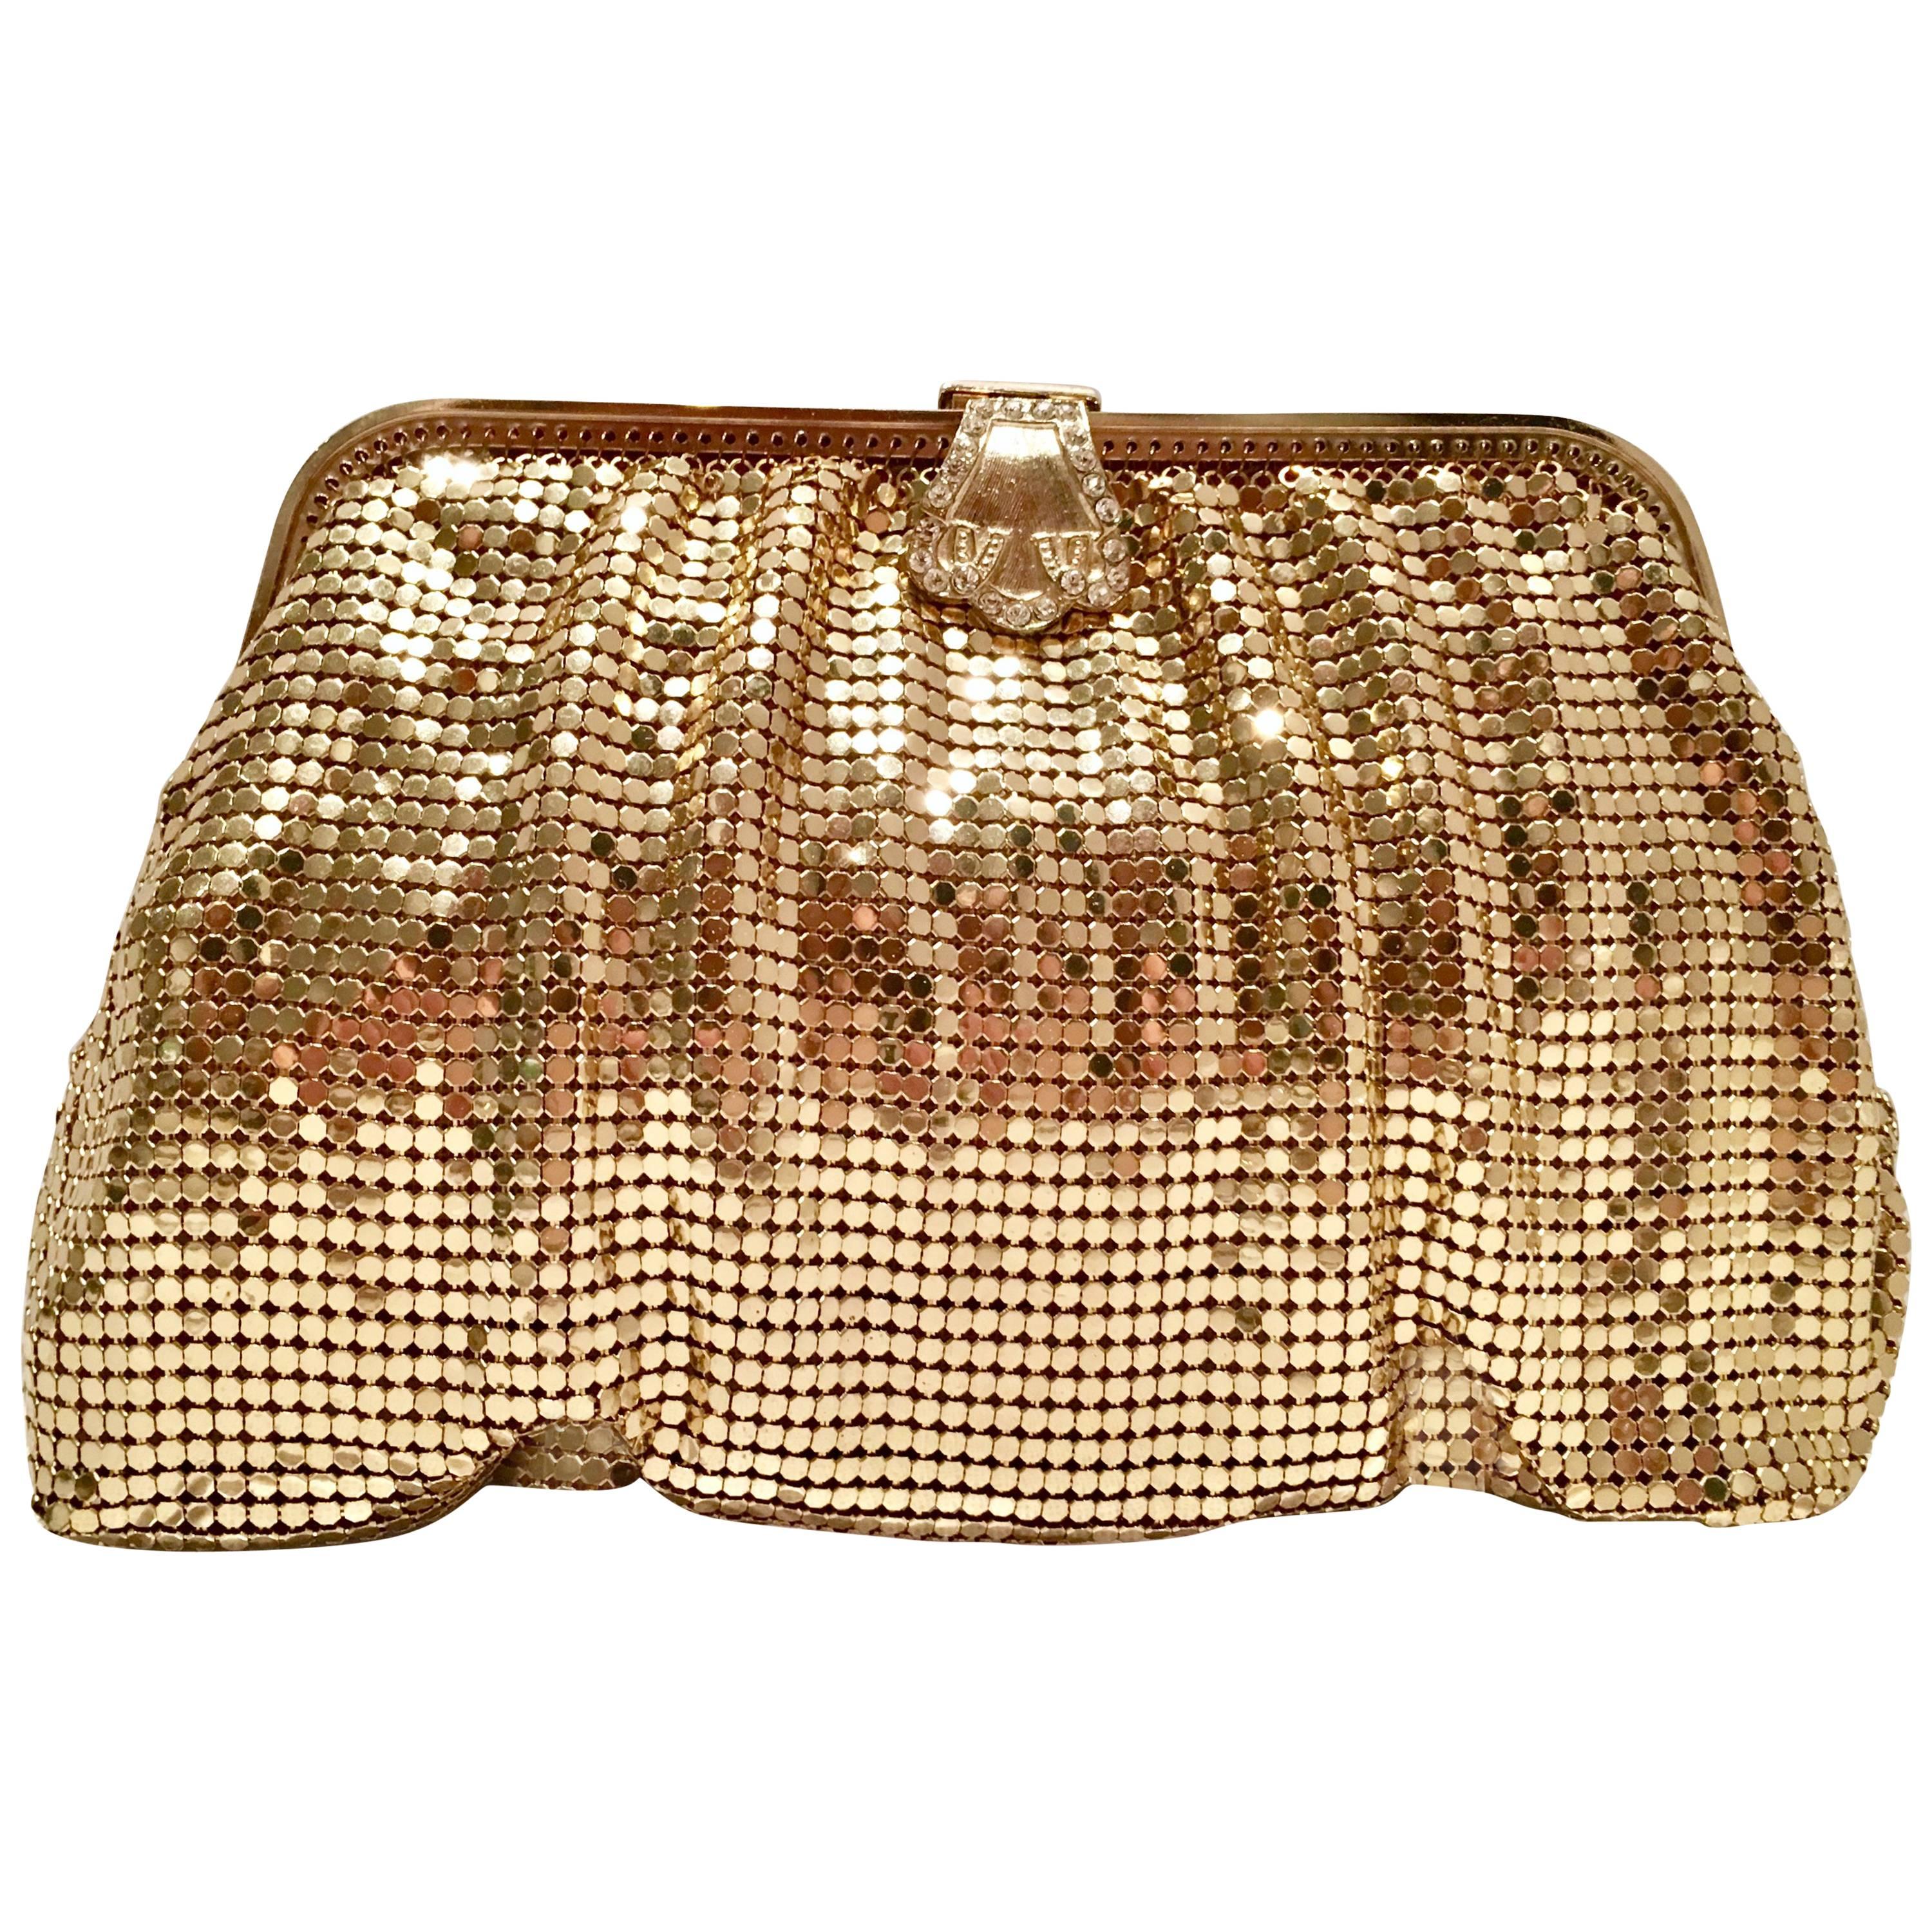 20th Century Gold Metal Mesh & Swarovksi Crystal Evening Bag By, Whiting & Davis For Sale